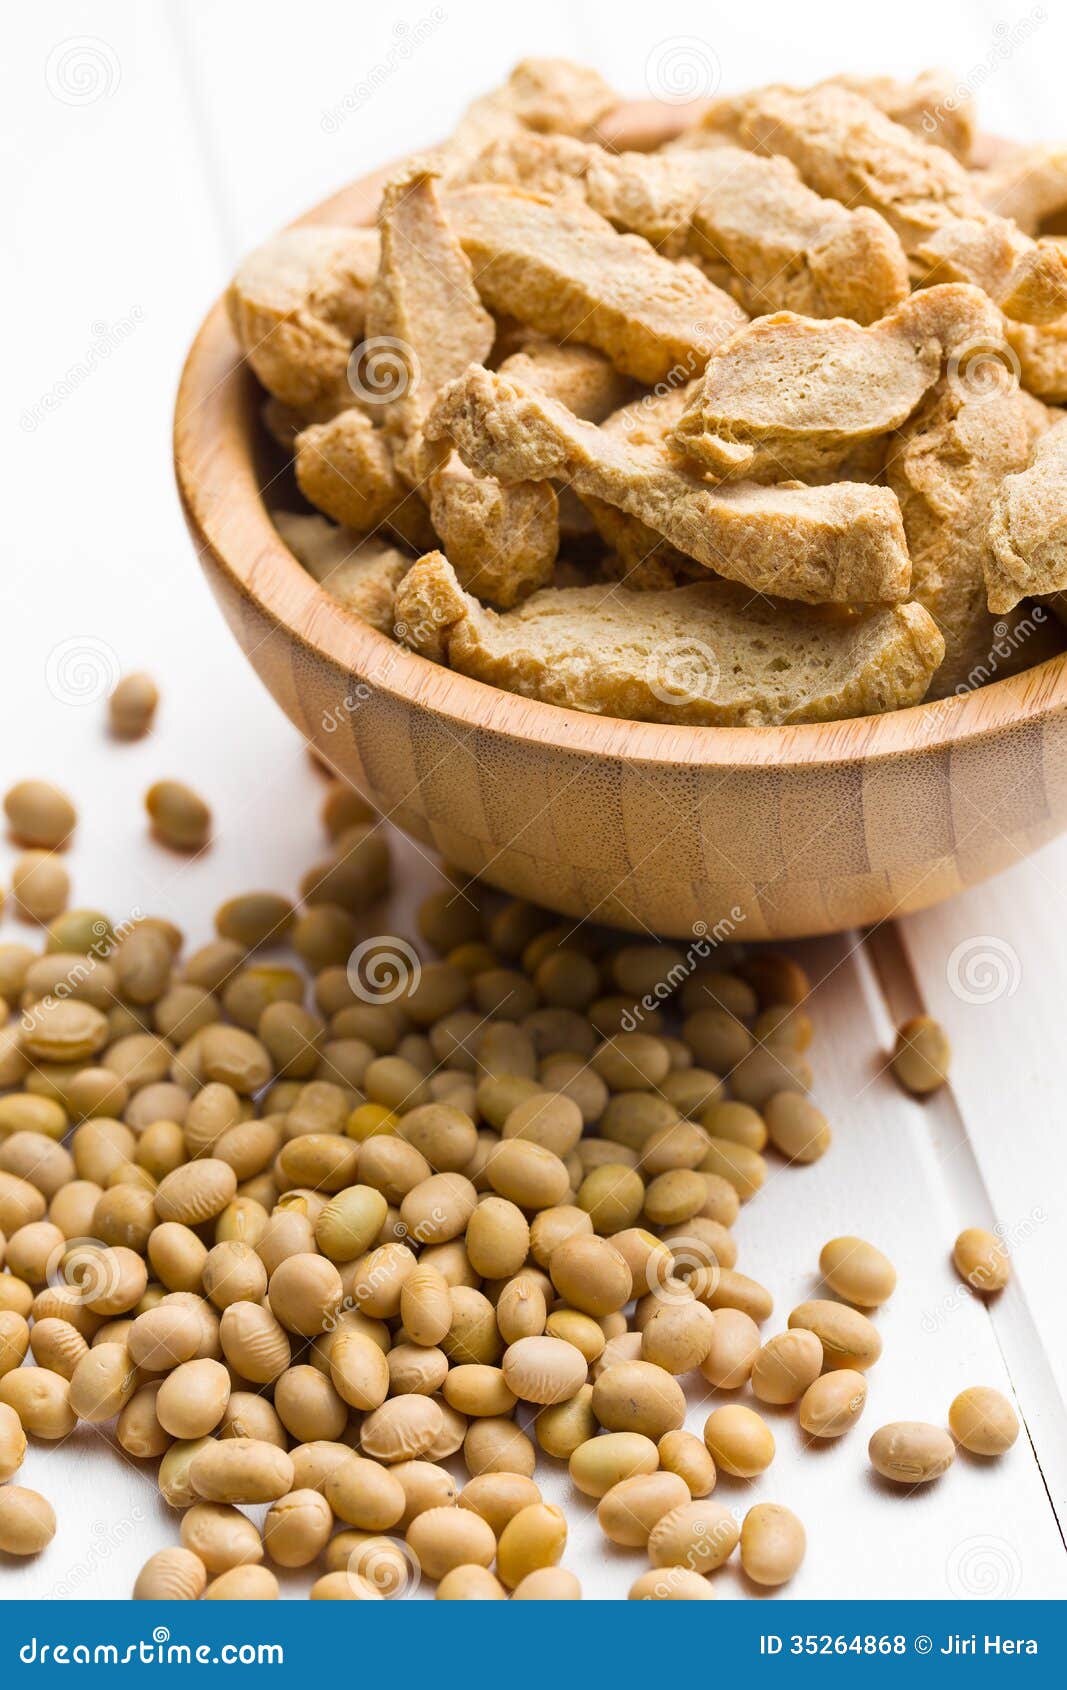 soy-meat-soybeans-bowl-white-wooden-table-35264868.jpg